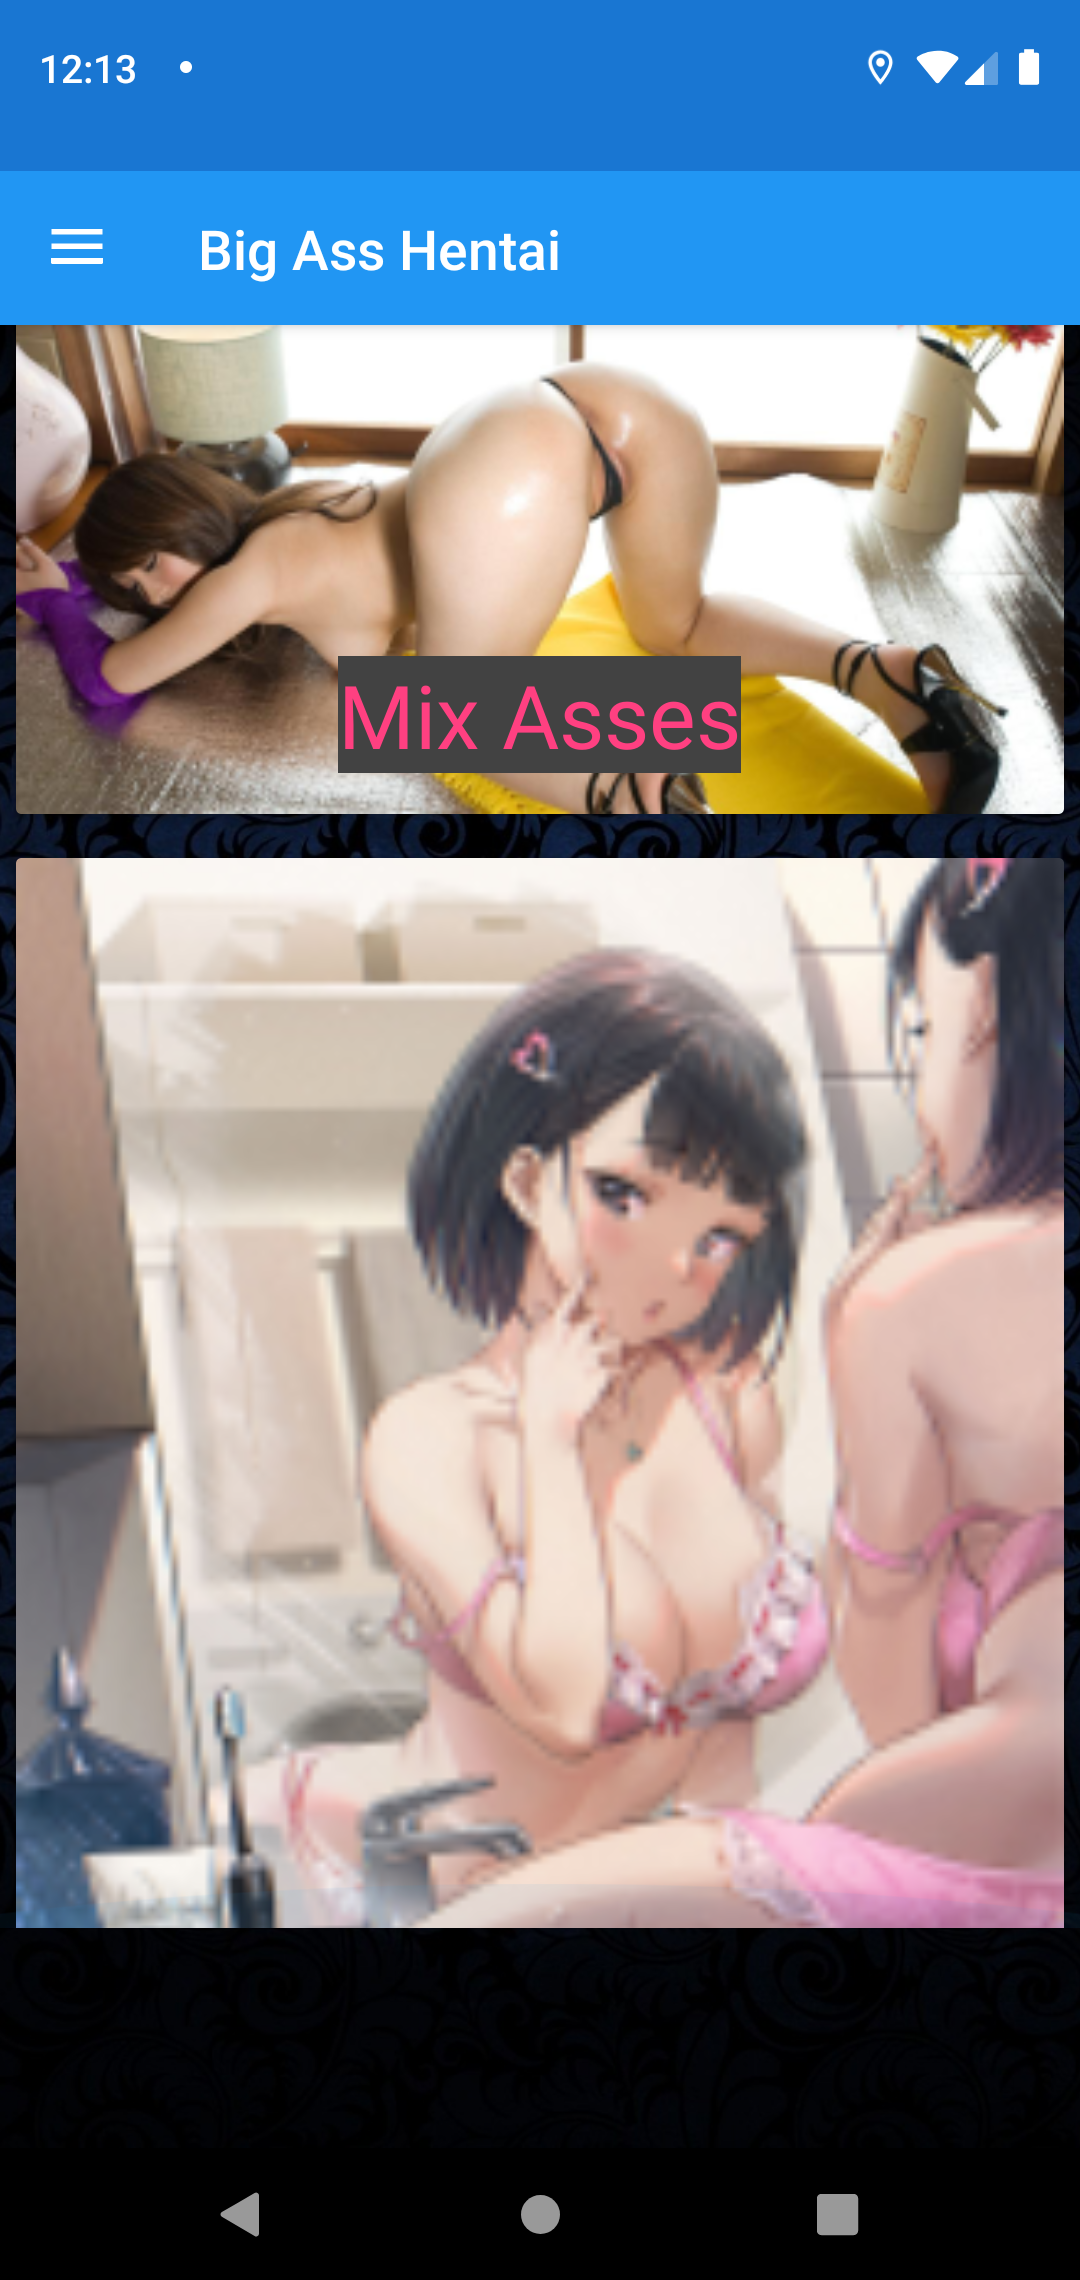 Hot Asses best,henti,big,gallery,nhentai,comics,hentai,pictures,pics,app,heantai,android,dreams,manga,download,apk,apps,porn,shrinking,anime,with,asses,wallpapers,video